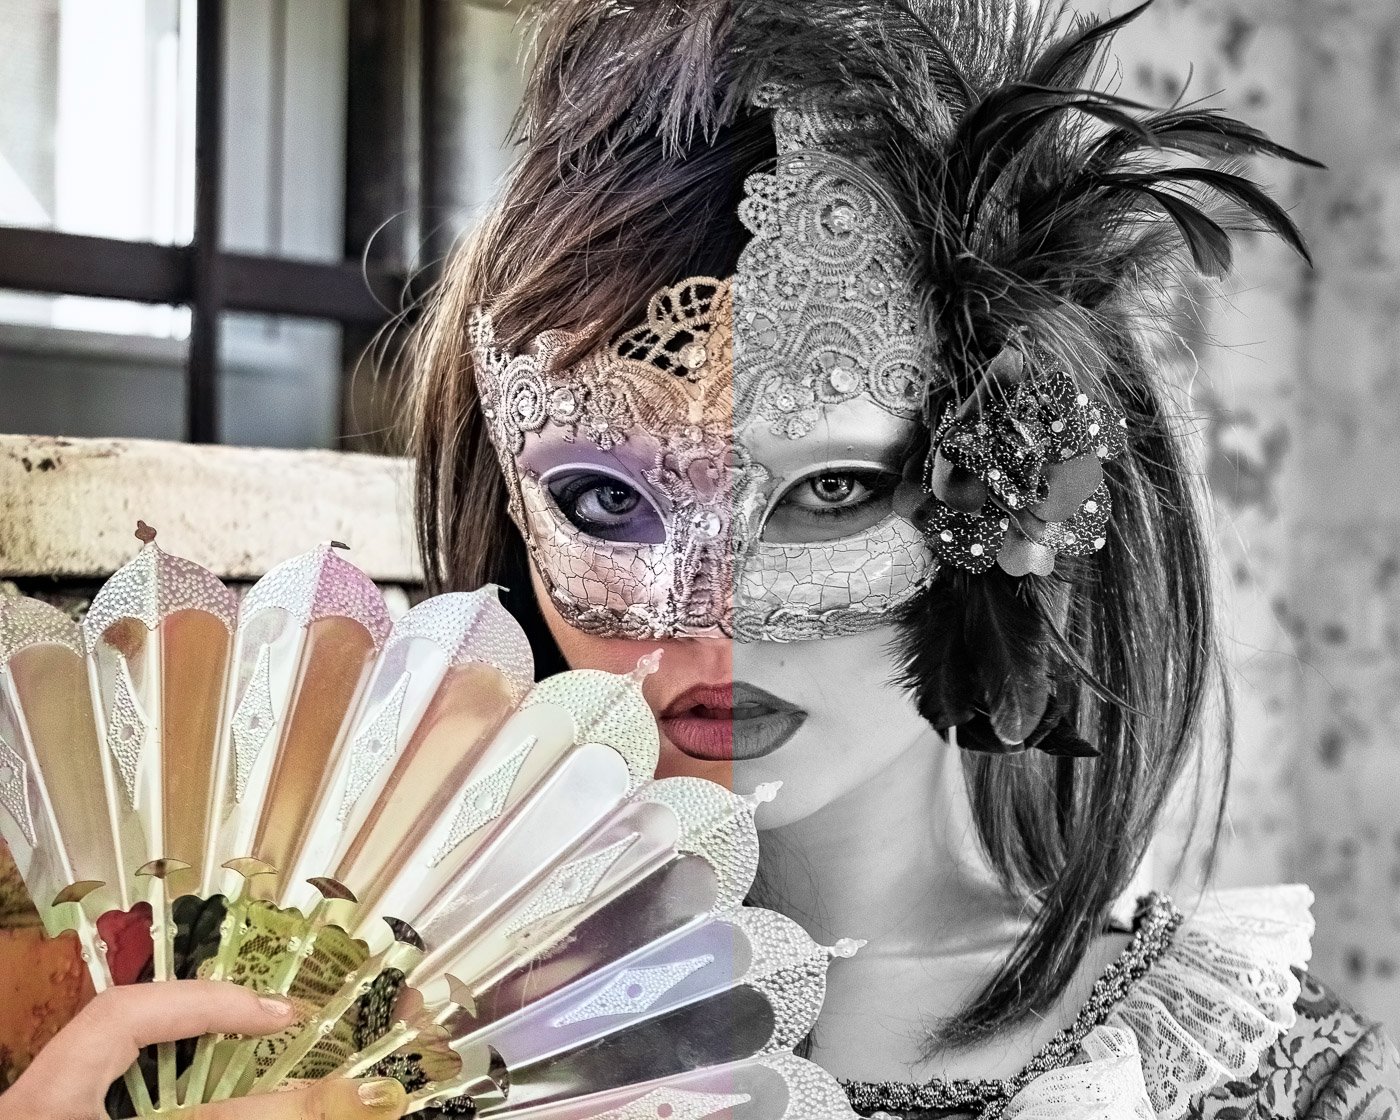 An image of a woman in a masquerade mask and holding a fan with one side color and the other side black and white